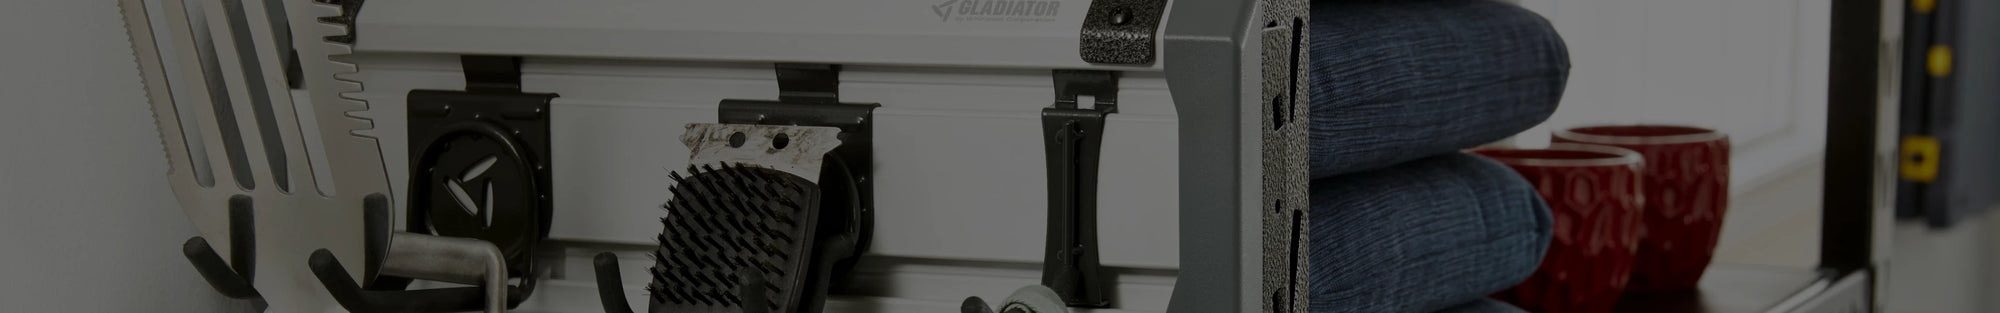 Tools and tape hanging on a Gladiator® shelving unit.